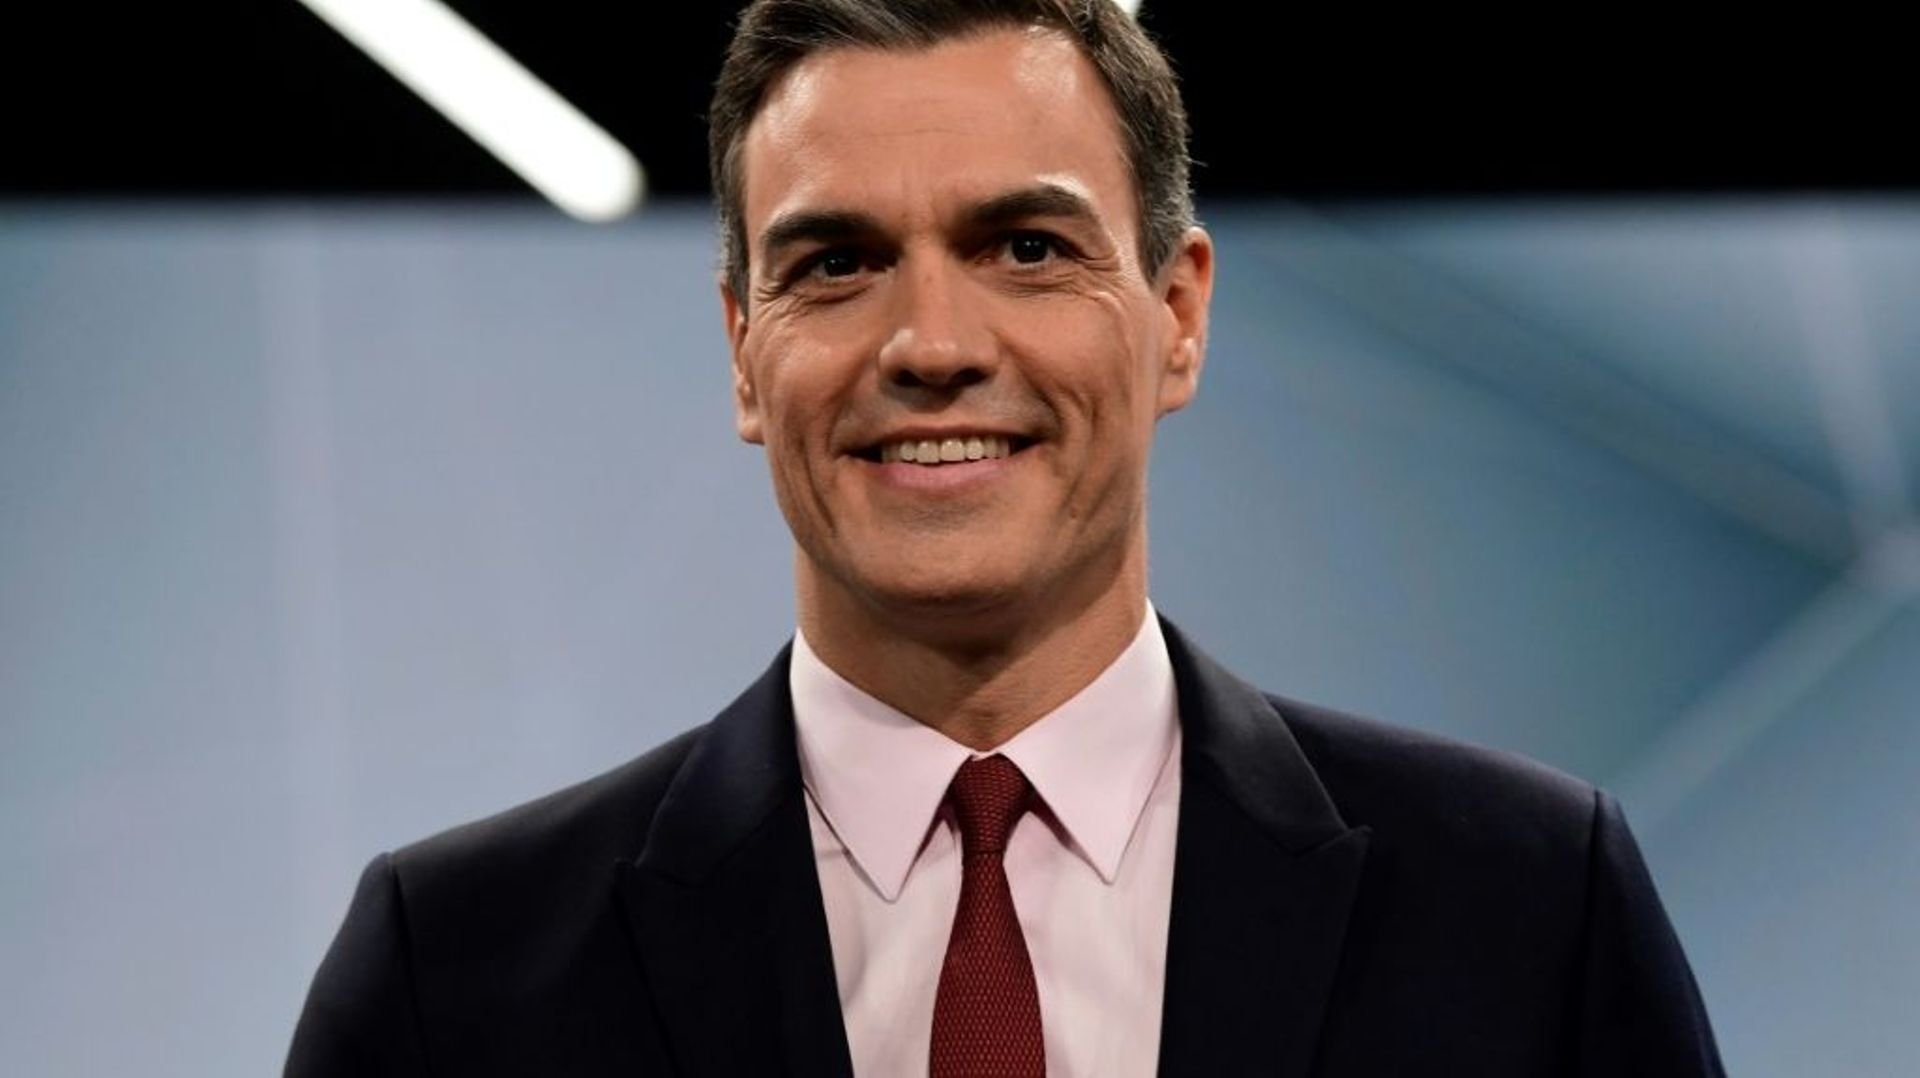 Spanish Prime Minister to propose Parliament to recognize Palestine